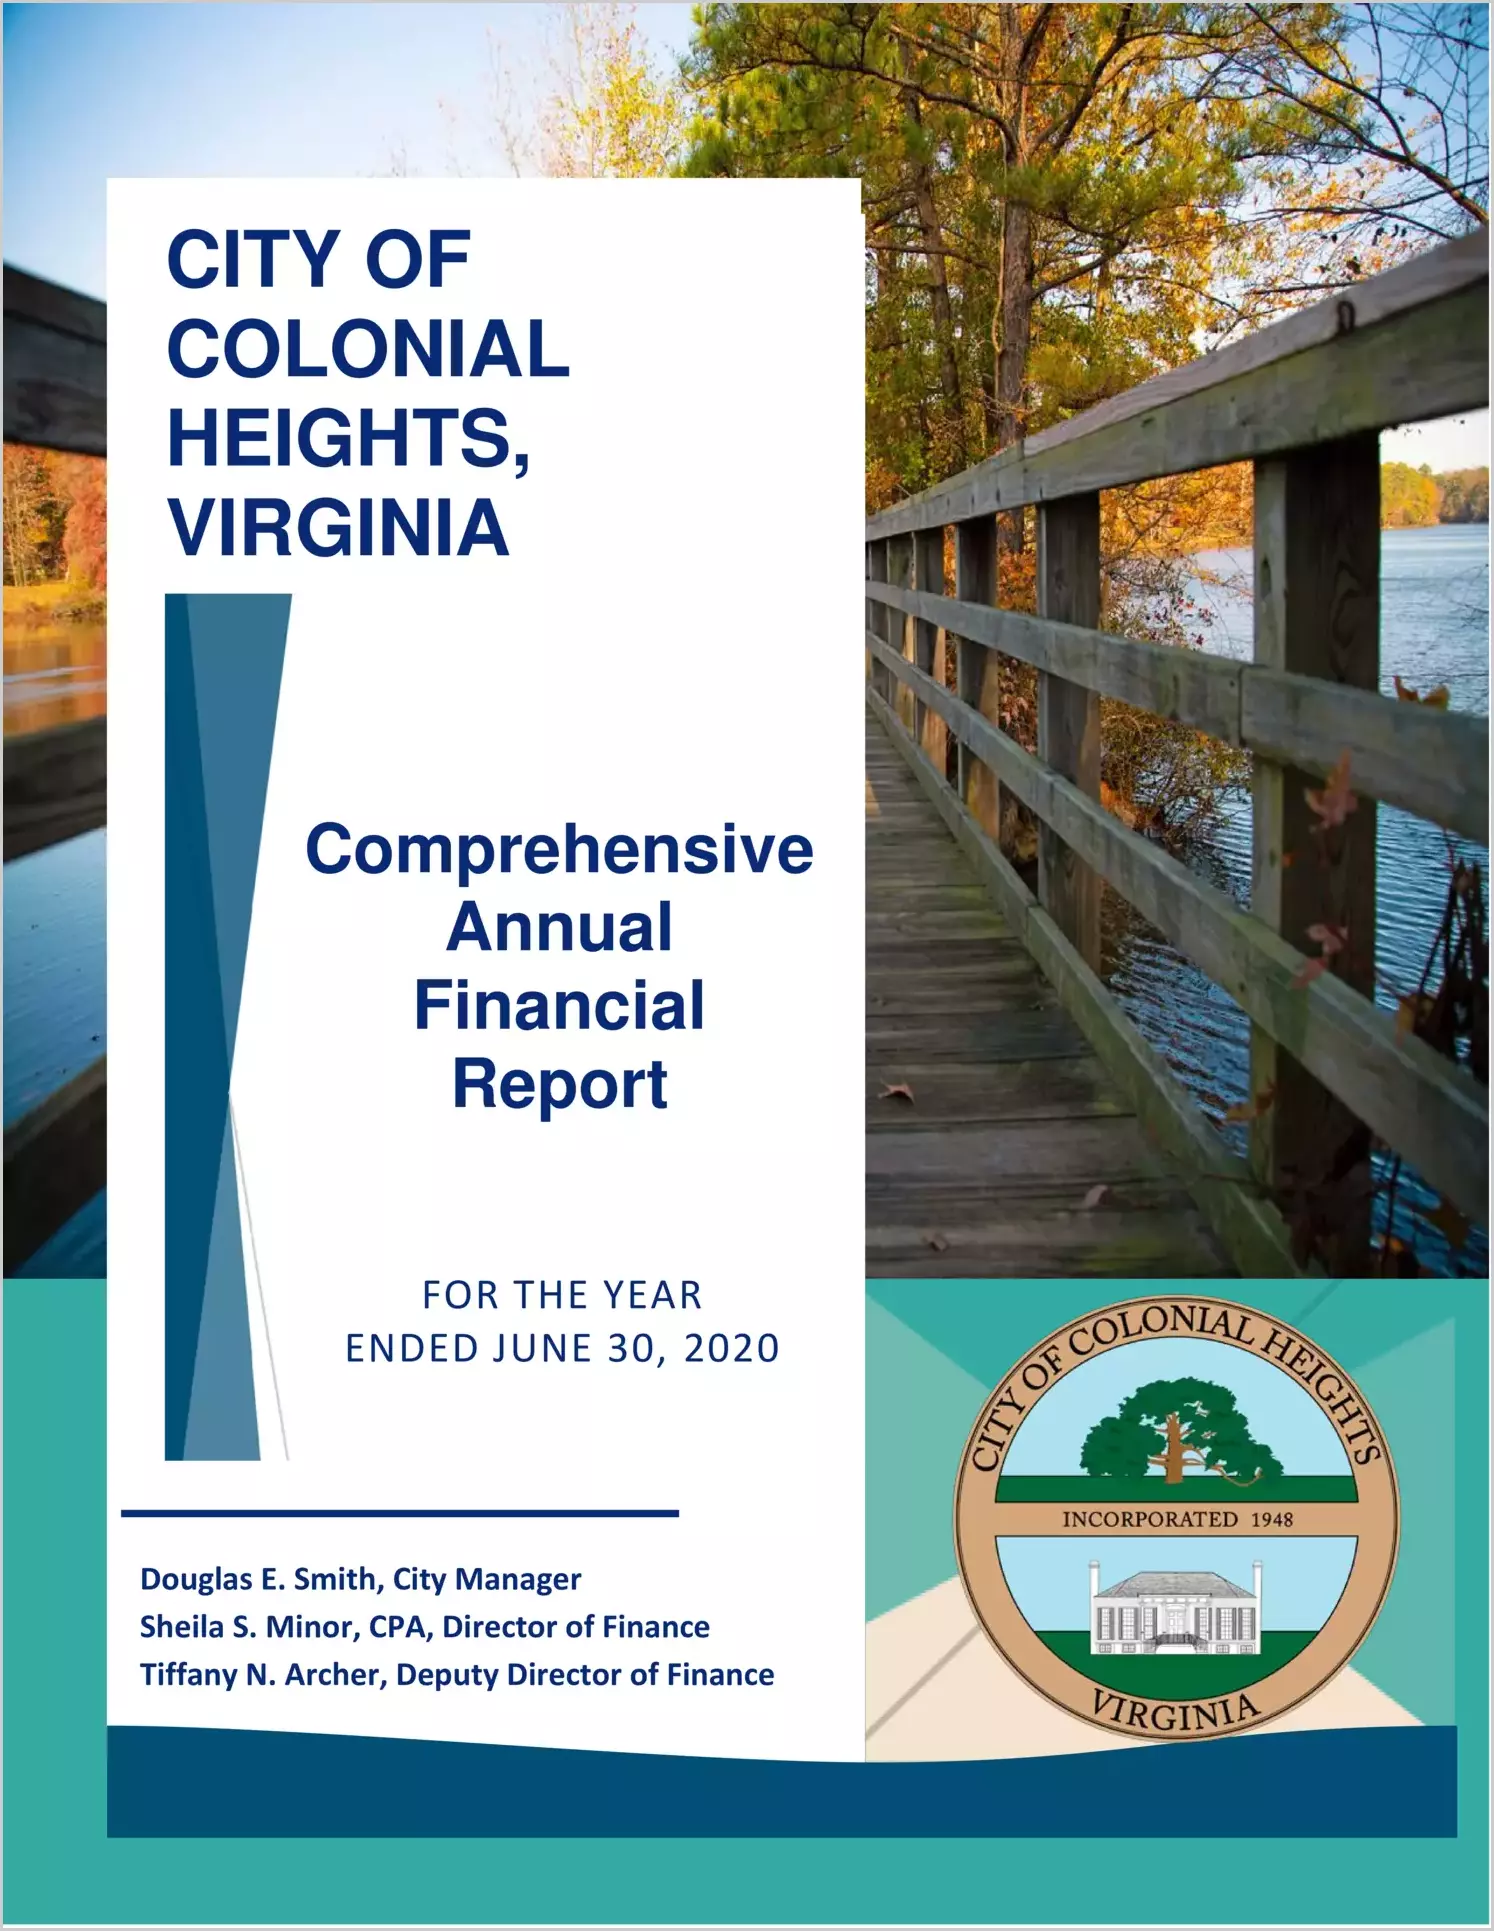 2020 Annual Financial Report for City of Colonial Heights